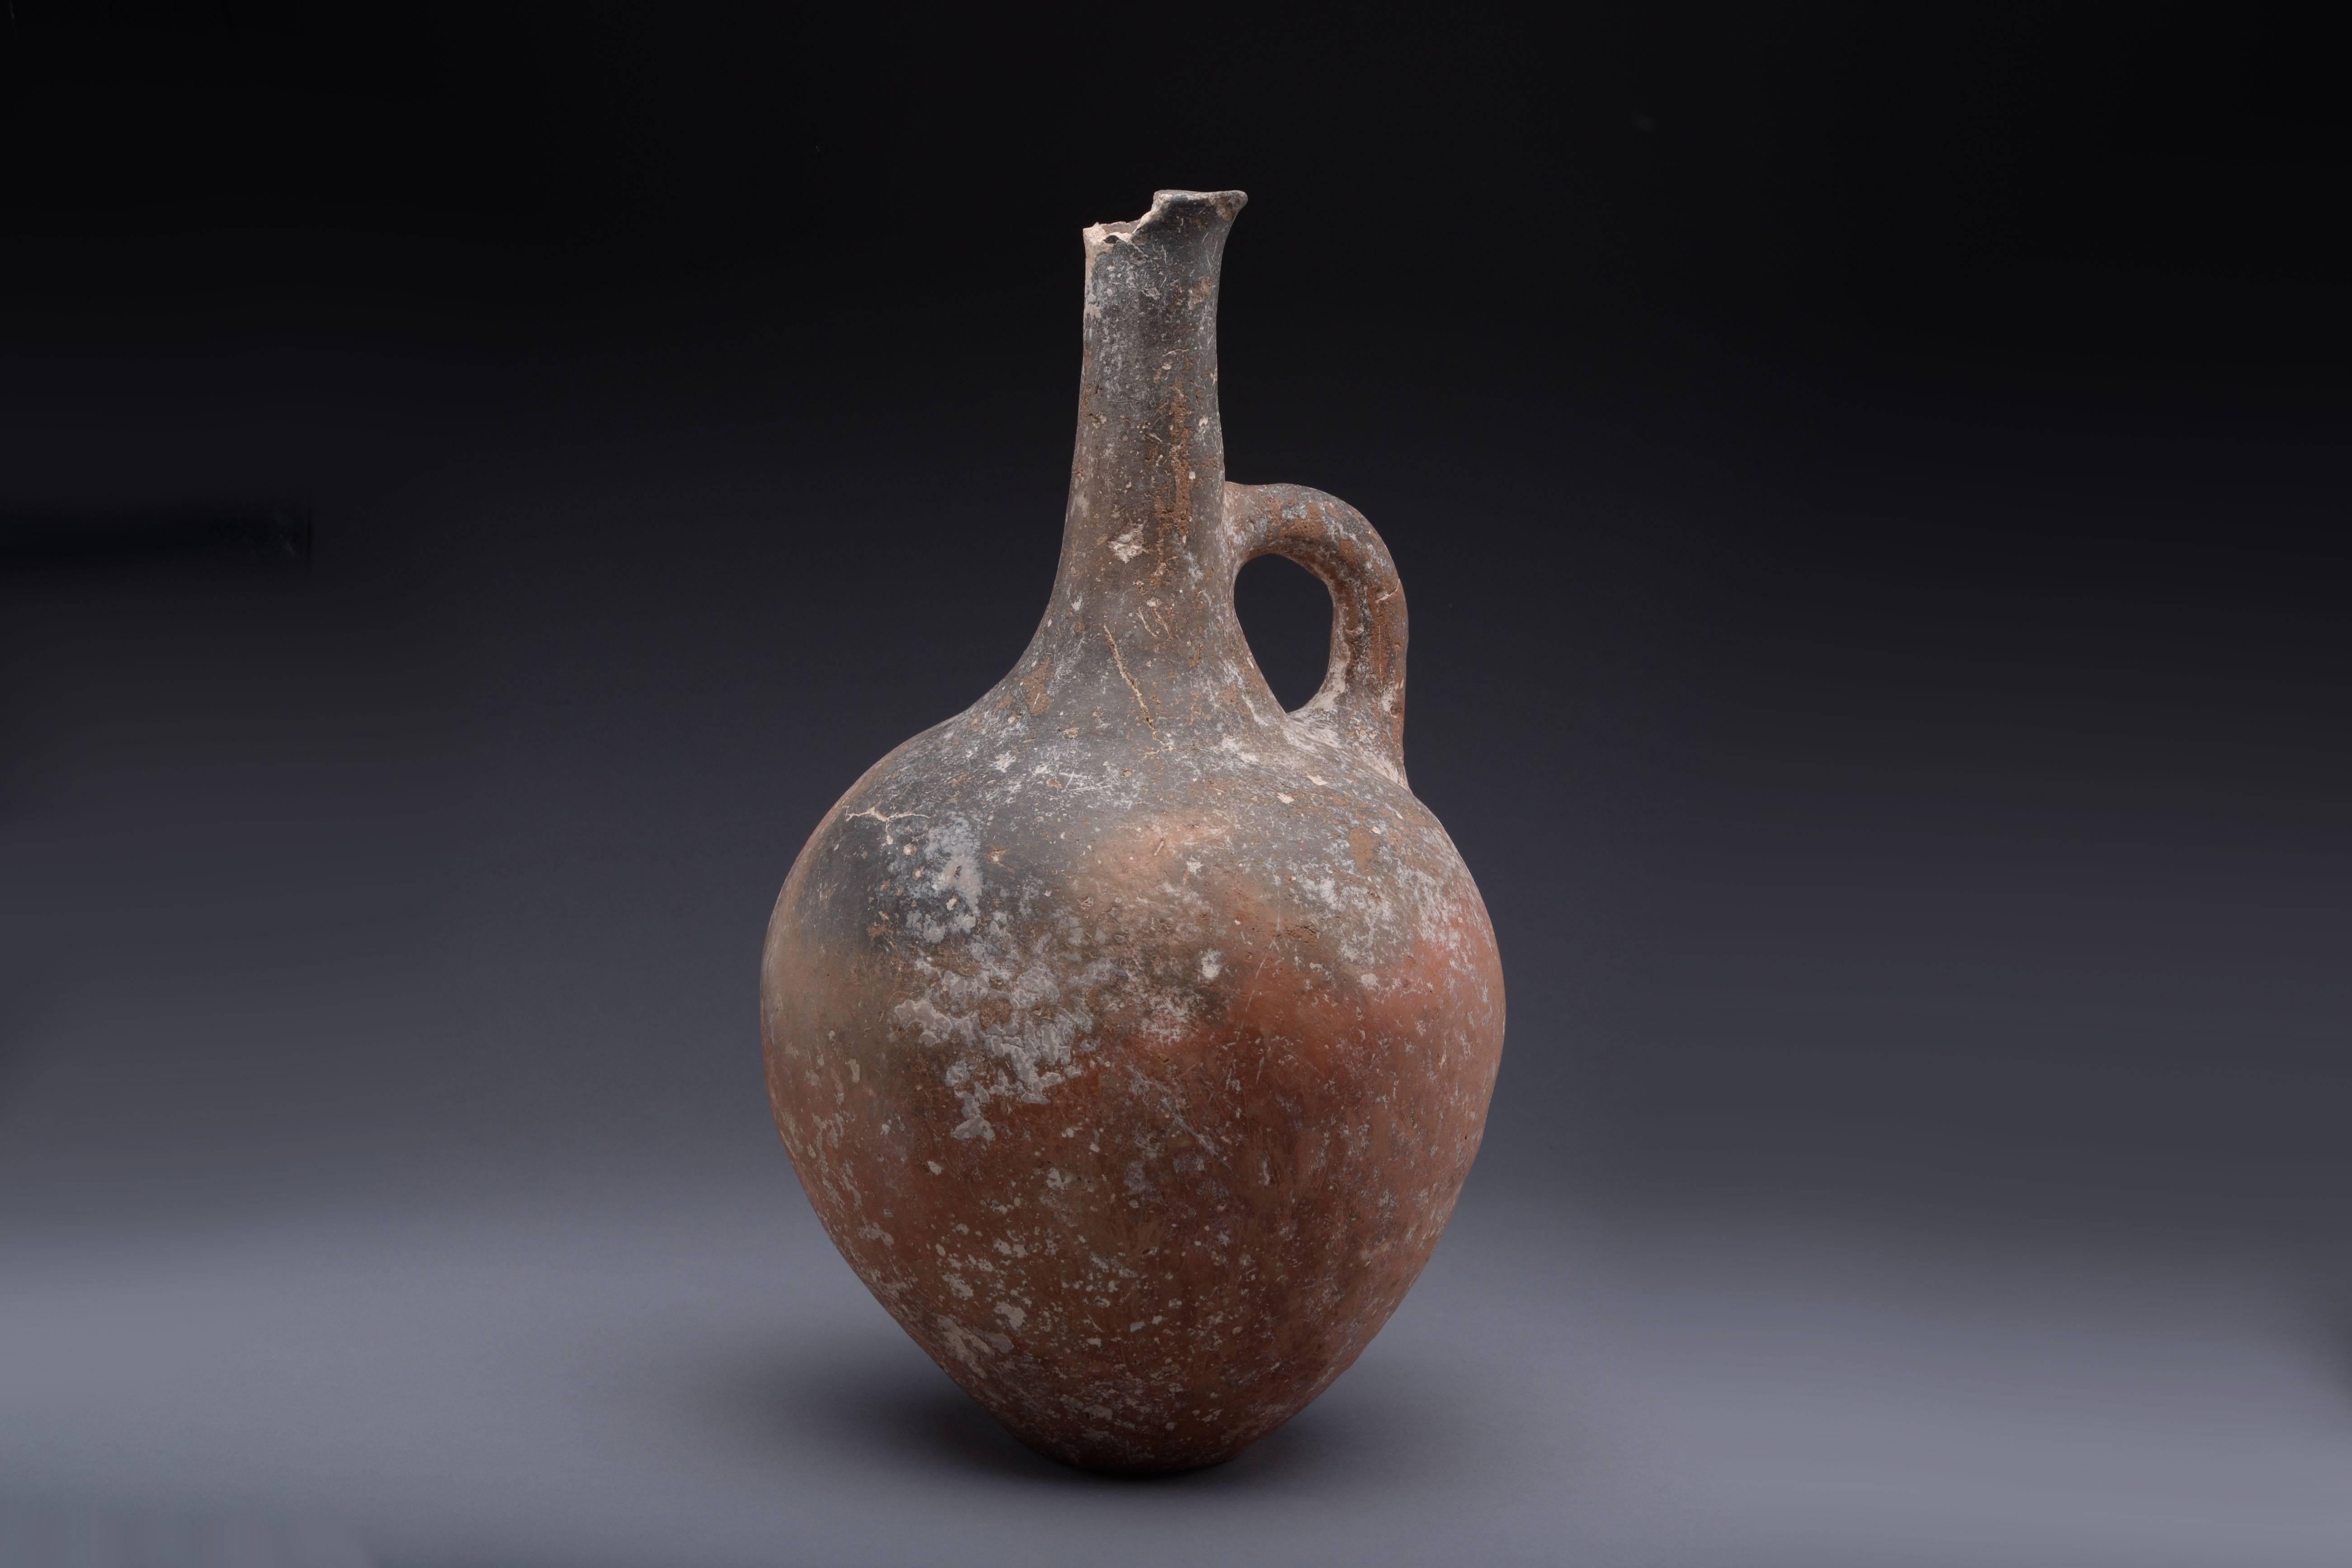 A large and handsome Cypriot Early Bronze Age jug, dating to around 2400 BC.

Of typical burnished red ware, with plump, rounded body, tall cylindrical neck and loop handle. 

Provenance:

Collected by Leon Rodrigues-Ely, 1924 – 1973. 

Leon